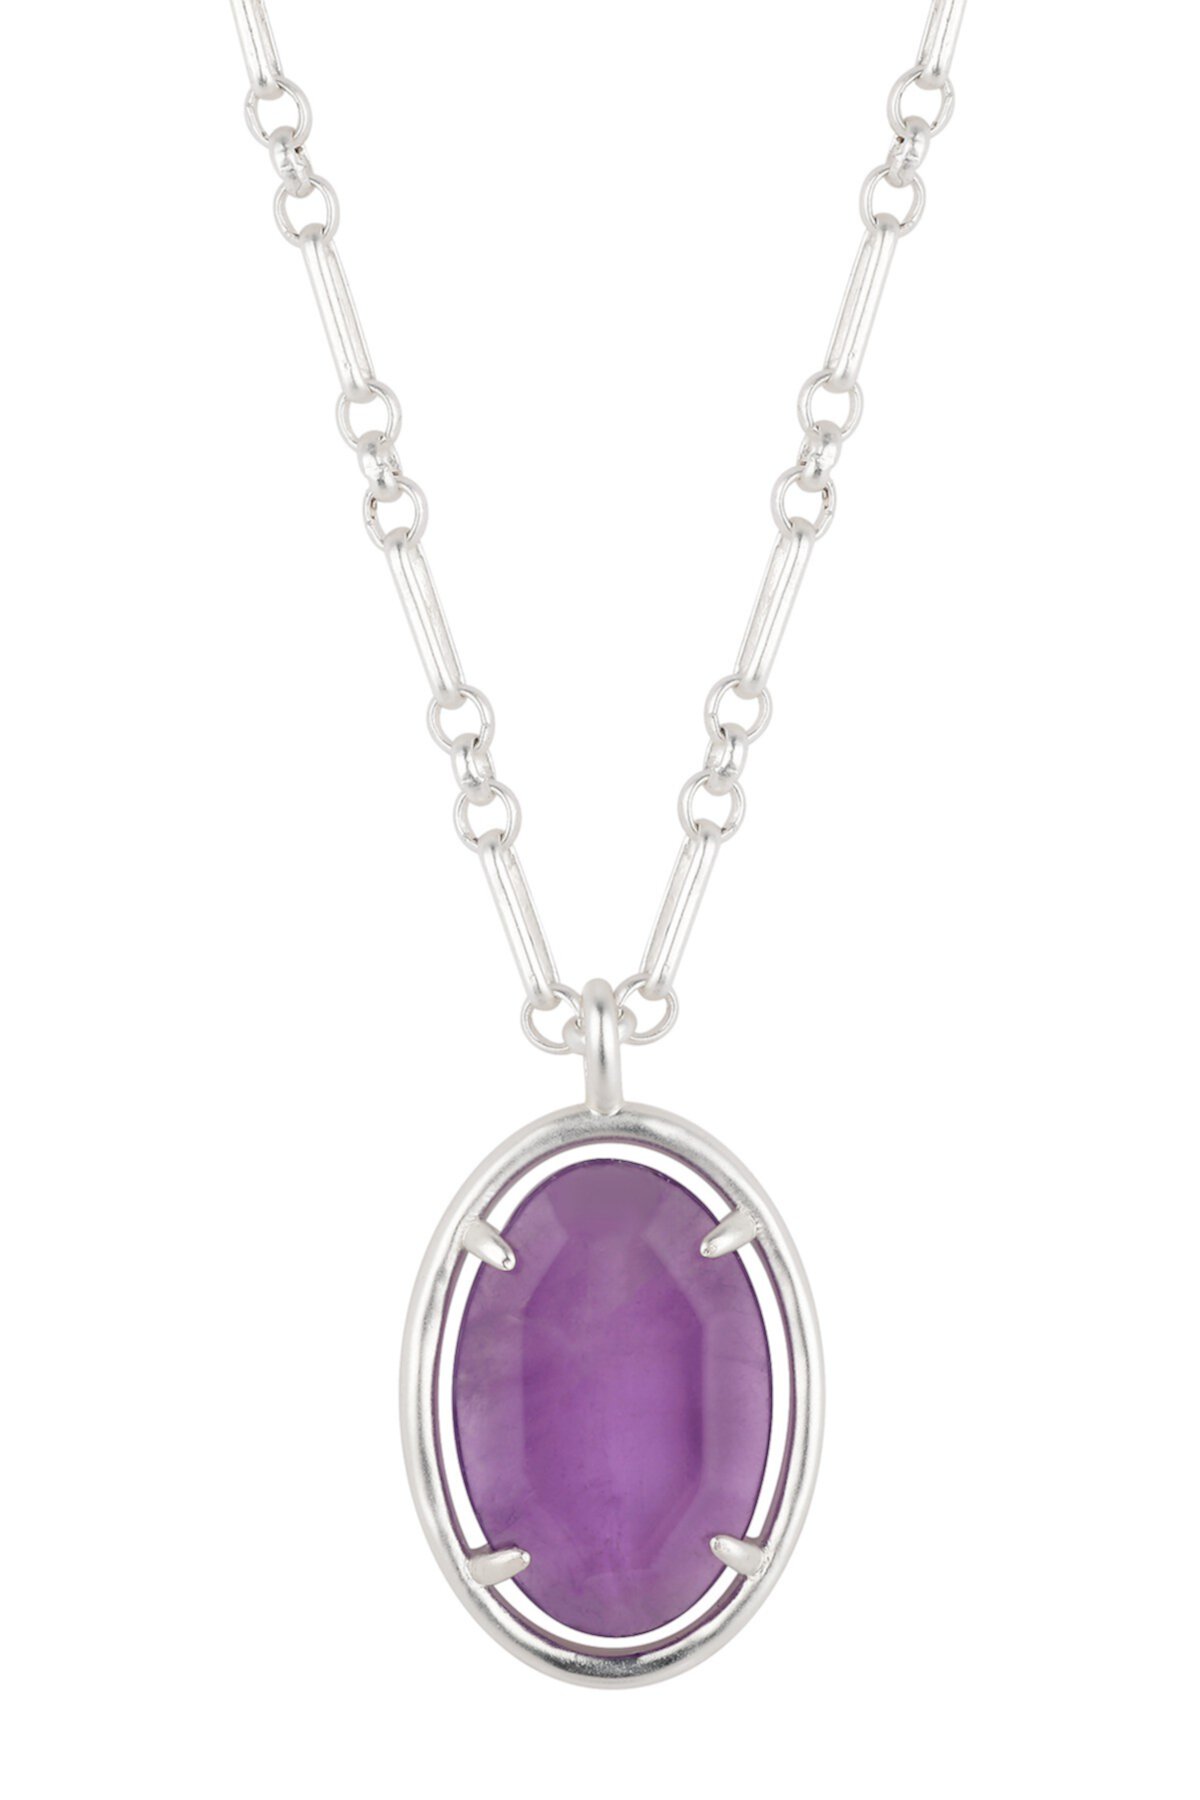 Purple Agate Oval Stone Necklace with Paperlink Chain LA Rocks